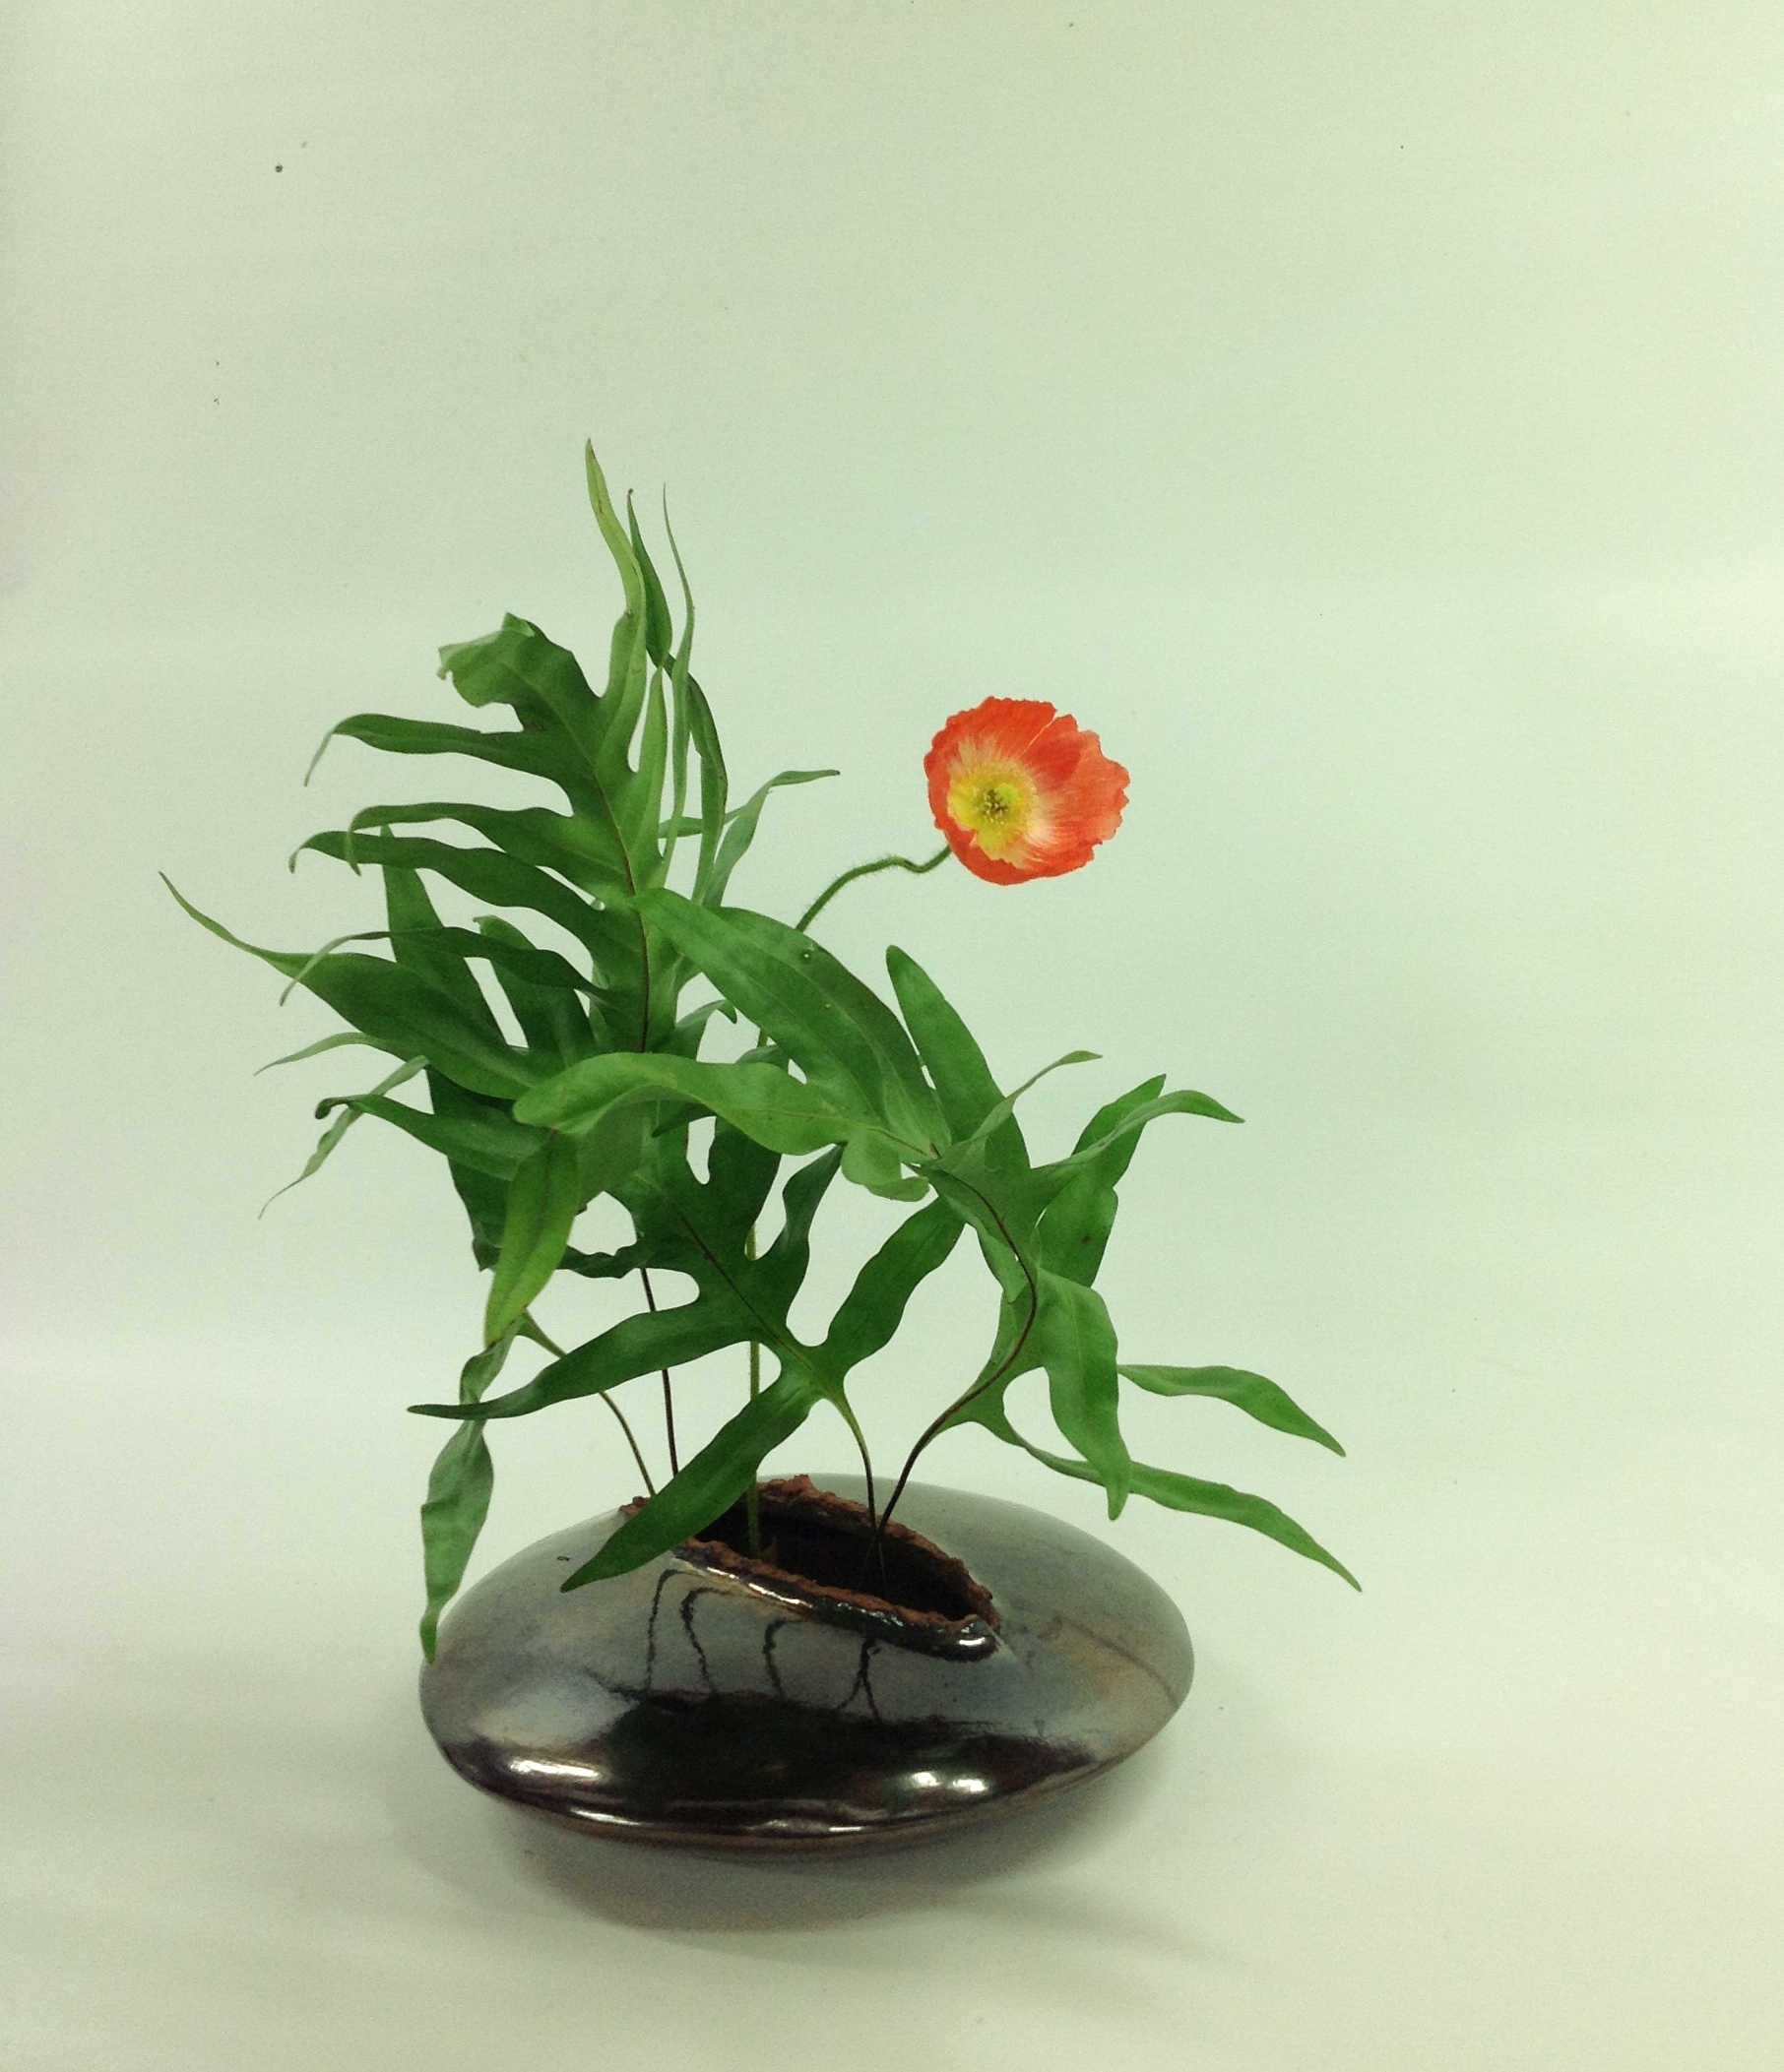 Pat's Ikebana - Sogetsu - Training and Classes in a modern form of the ...